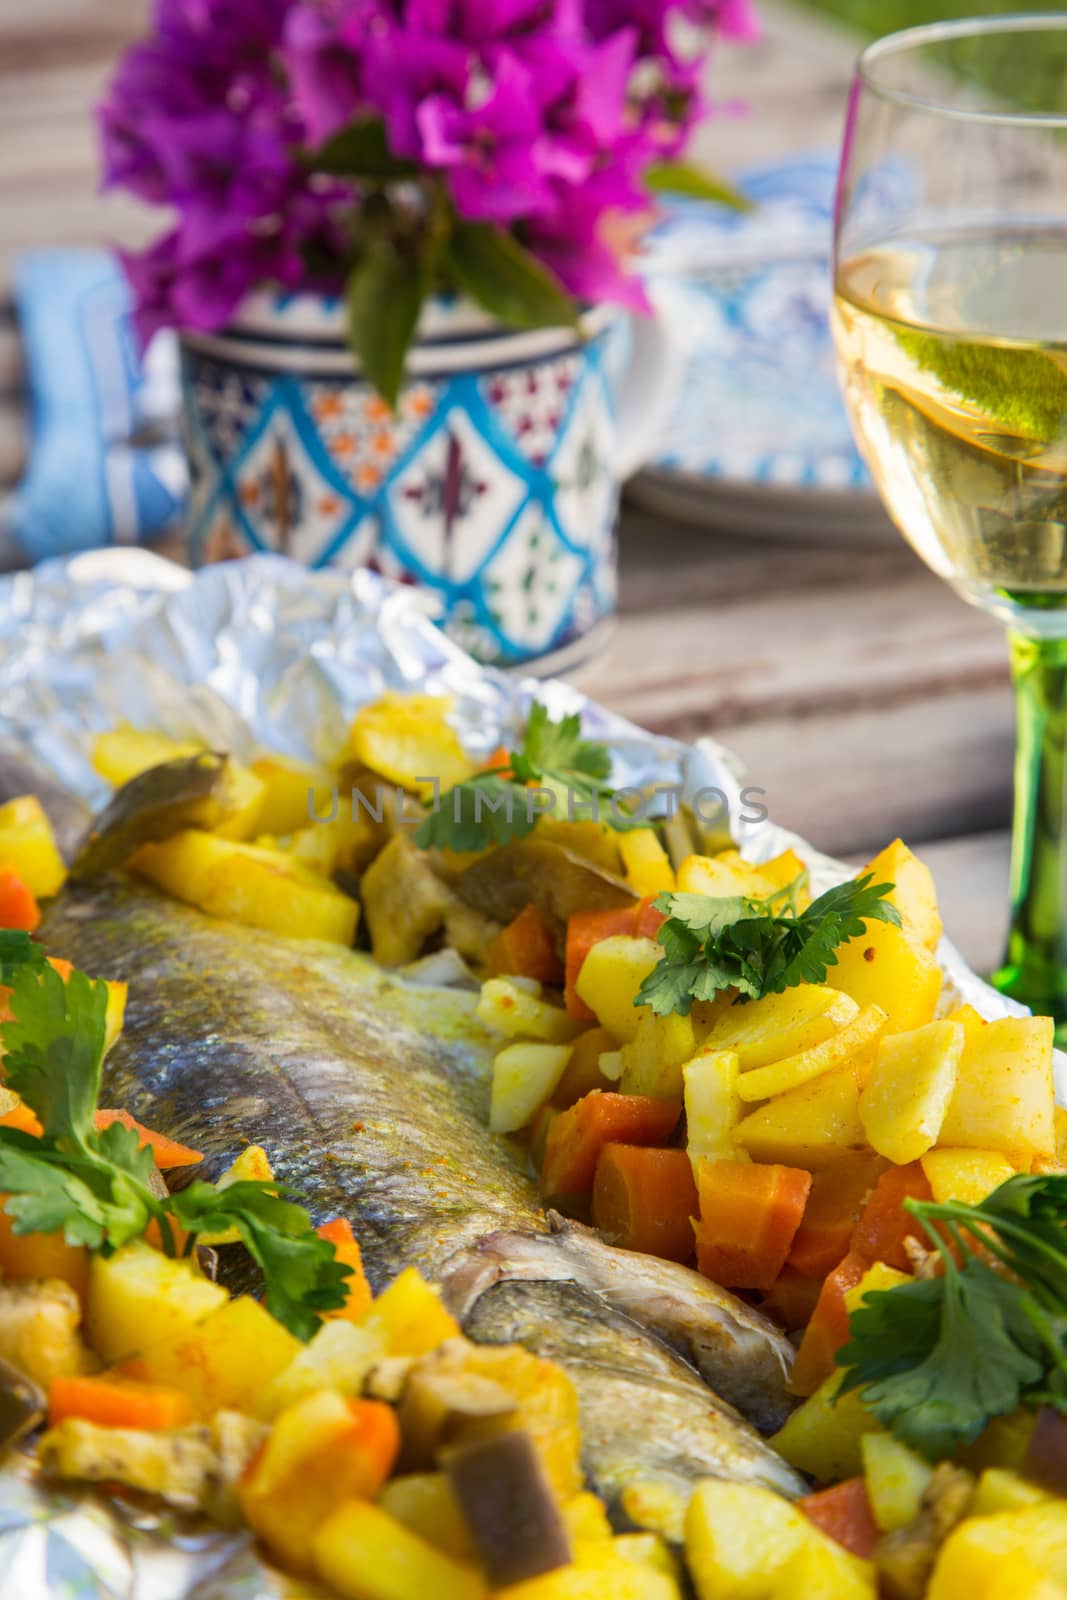 Baked sea bass with vegetables in the aluminum foil